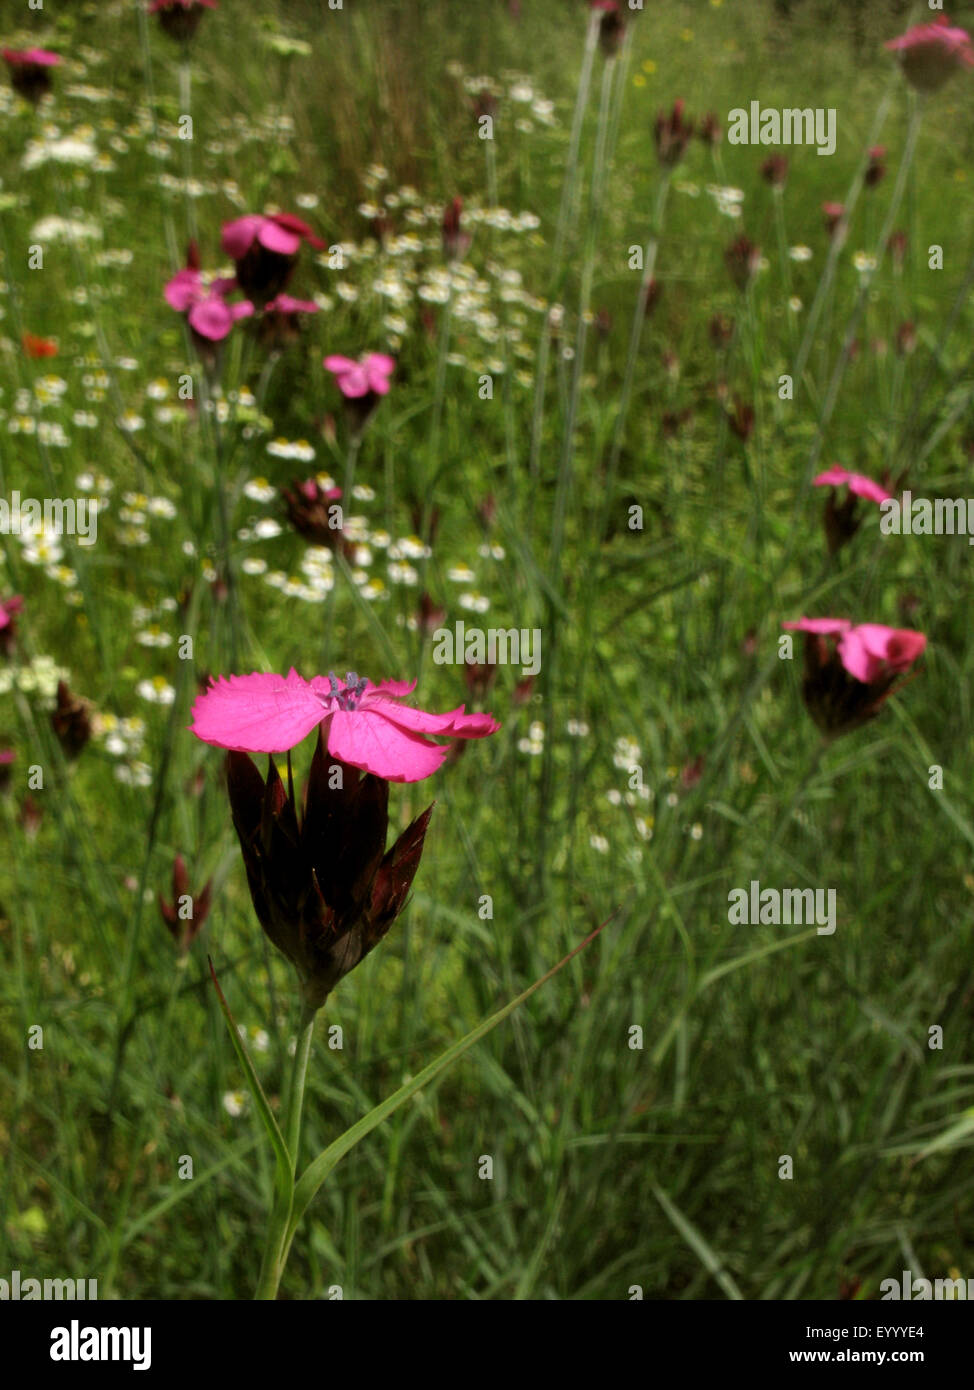 Carthusian pink, Clusterhead pink (Dianthus carthusianorum), blooming in a meadow, Germany Stock Photo